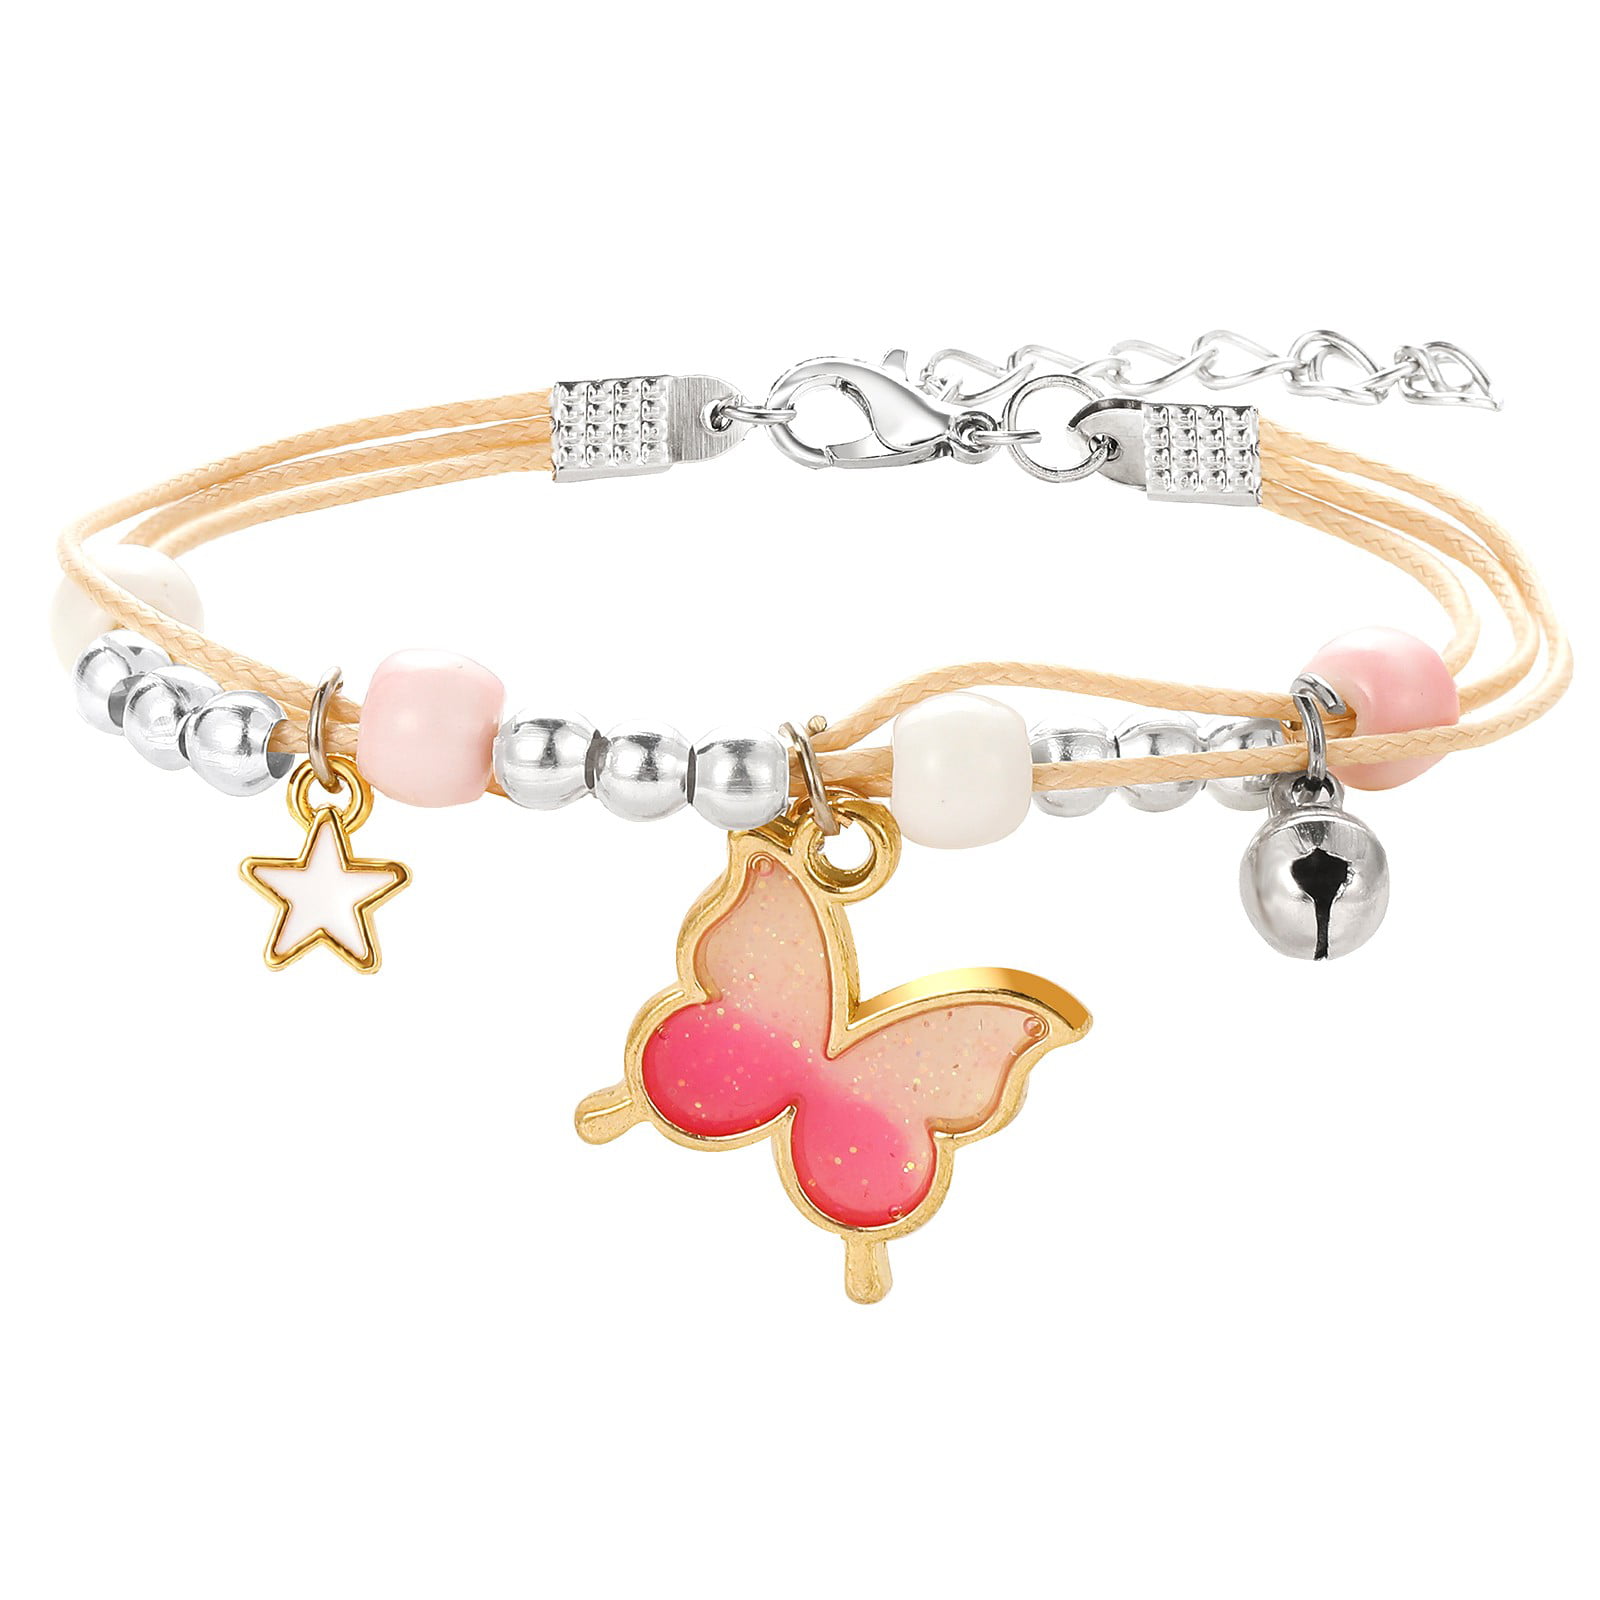 Butterflies and Fairies Childrens Cream Leather Charm Bracelet with Gift Box